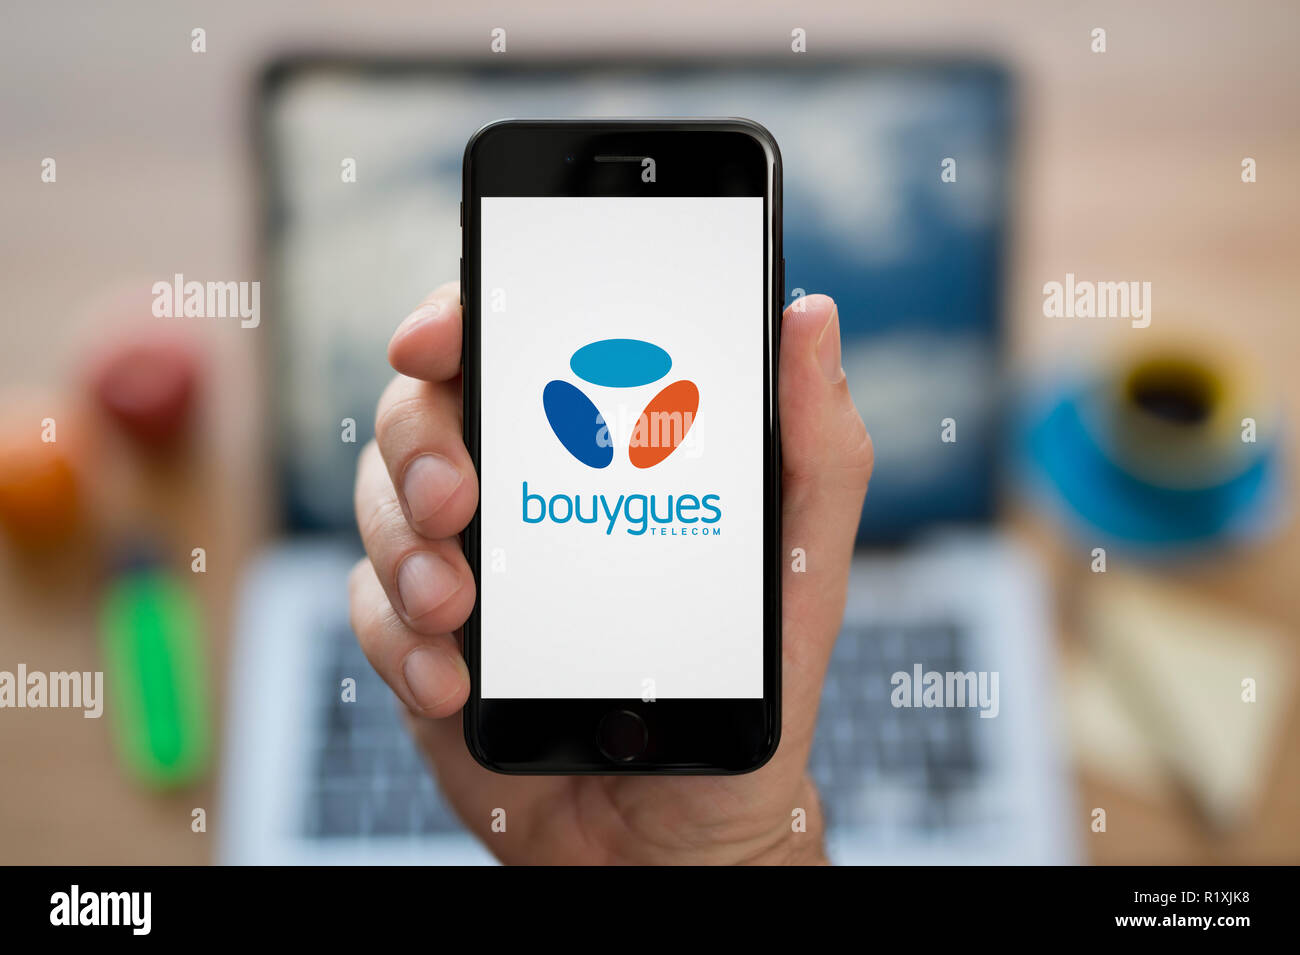 A man looks at his iPhone which displays the Bouygues logo, while sat at his computer desk (Editorial use only). Stock Photo